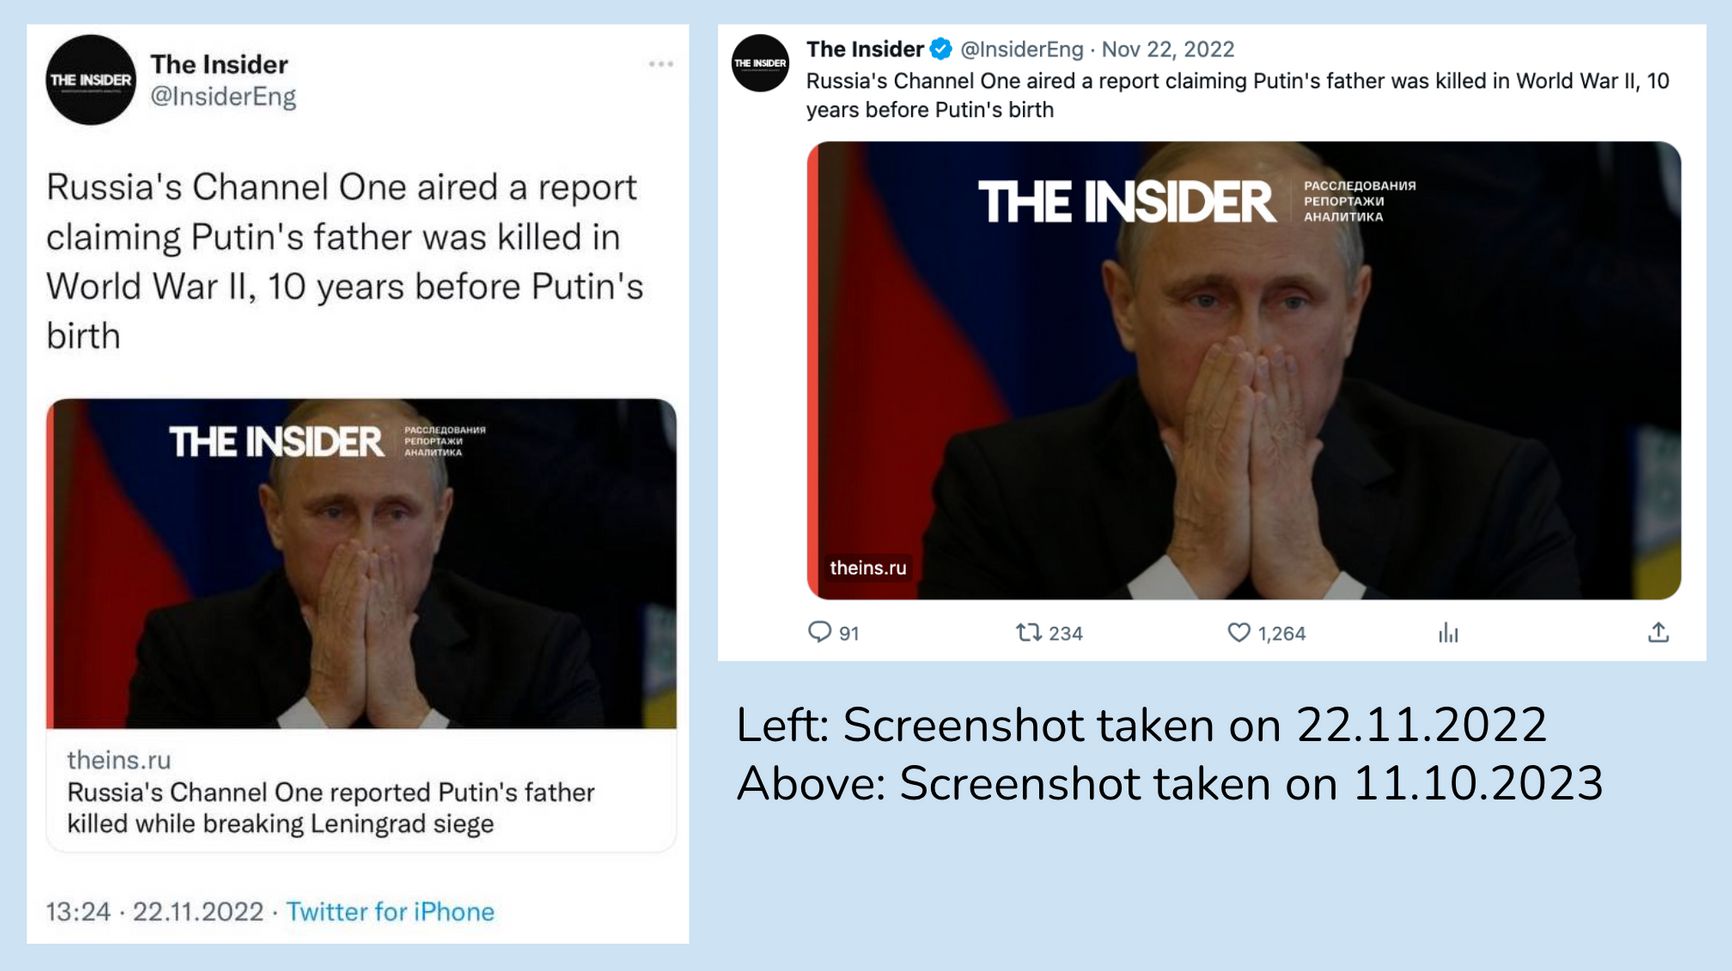 The same post in The Insider's account before and after Twitter started removing headlines